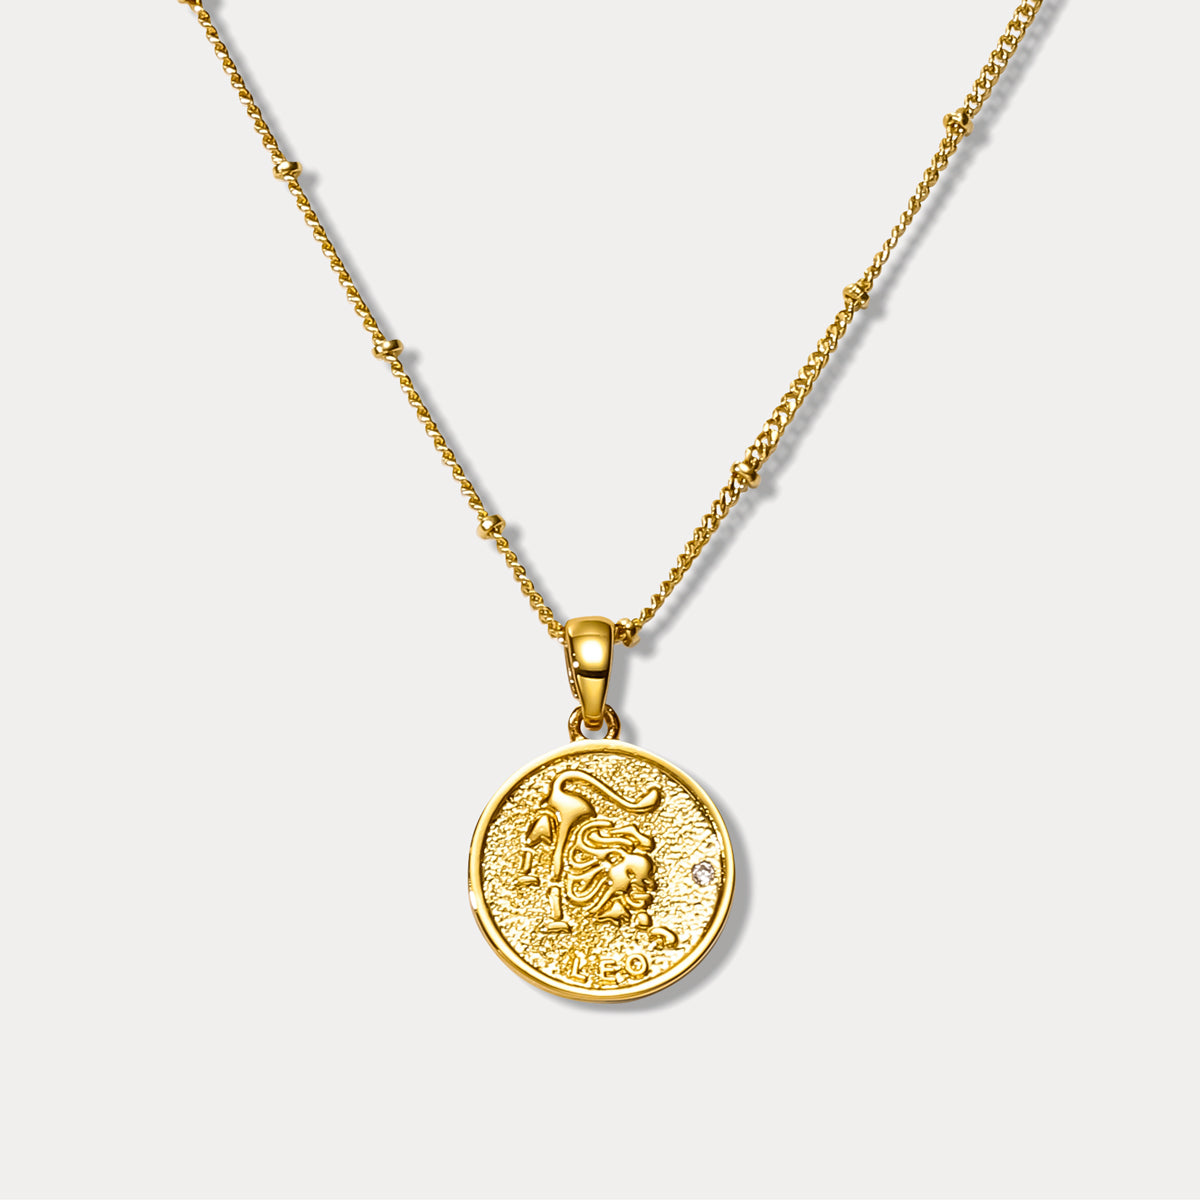 Leo Constellation Coin Pendant Necklace